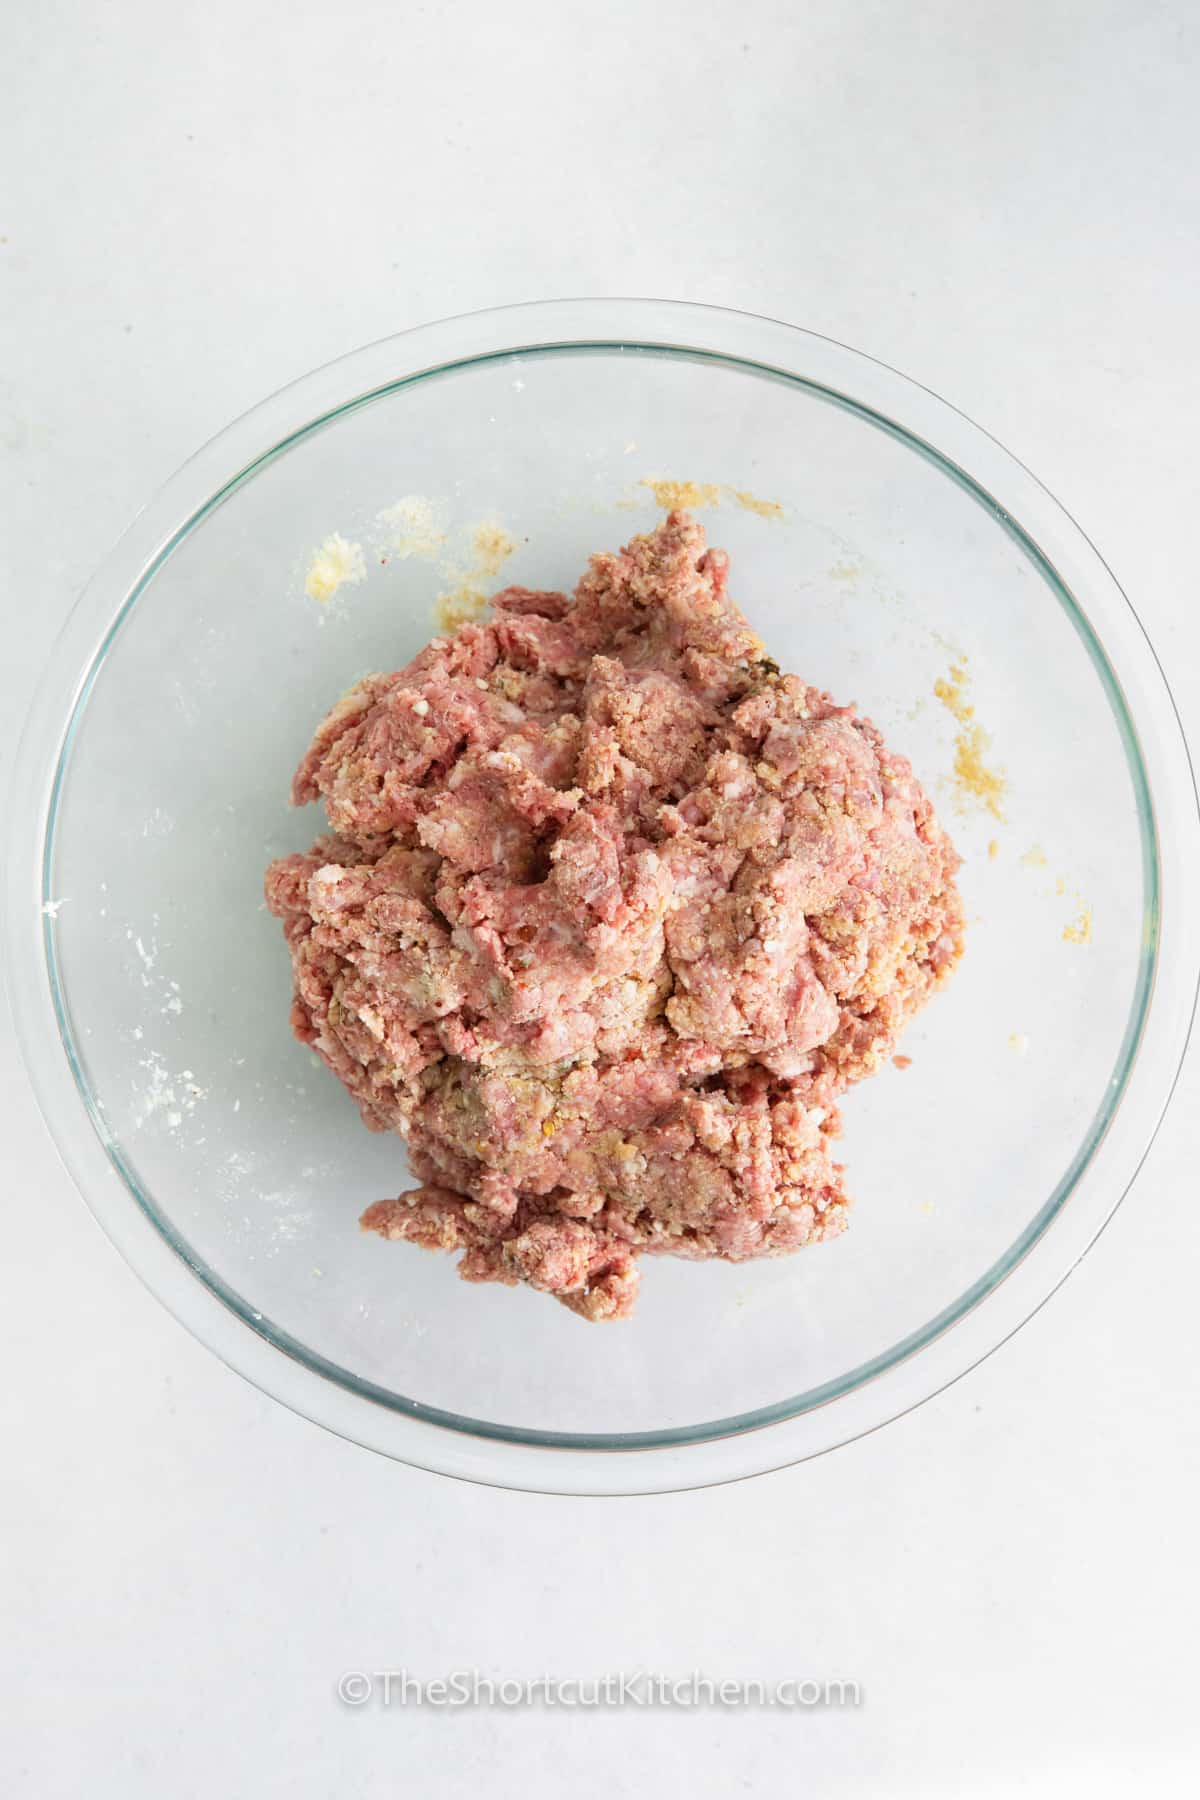 mixed ingredients to make Easy Air Fryer Meatballs